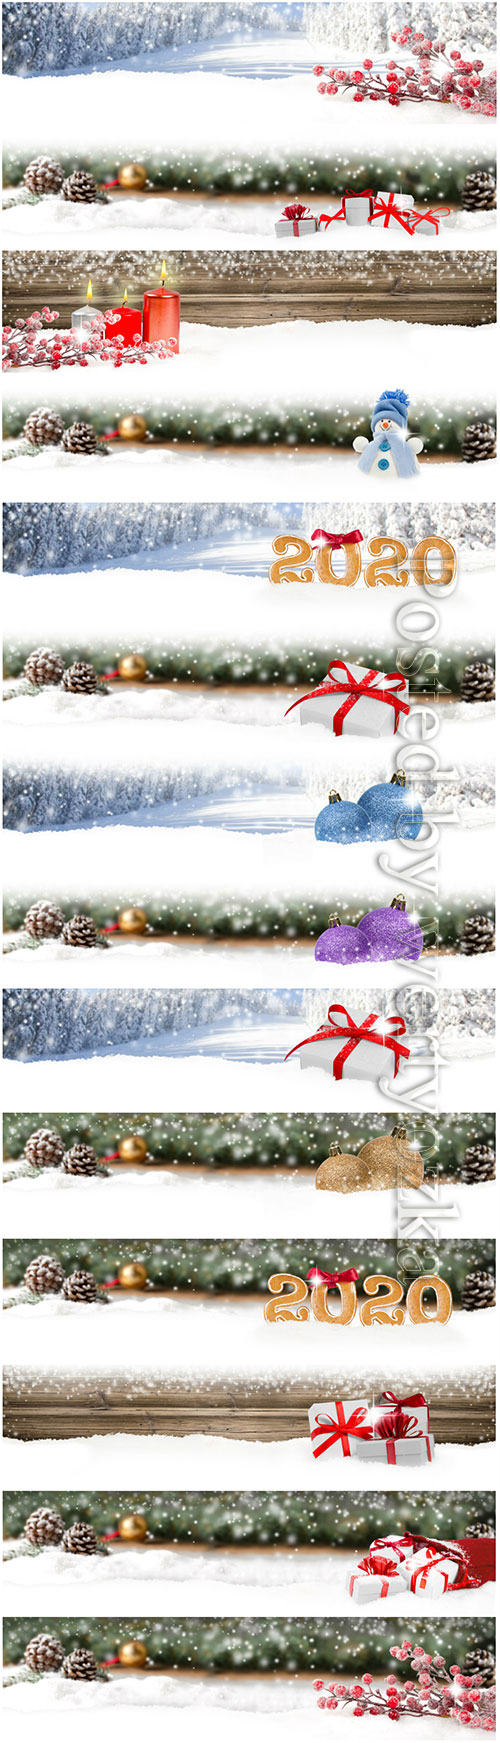 Christmas banners with fir branches, candles and Christmas decorations